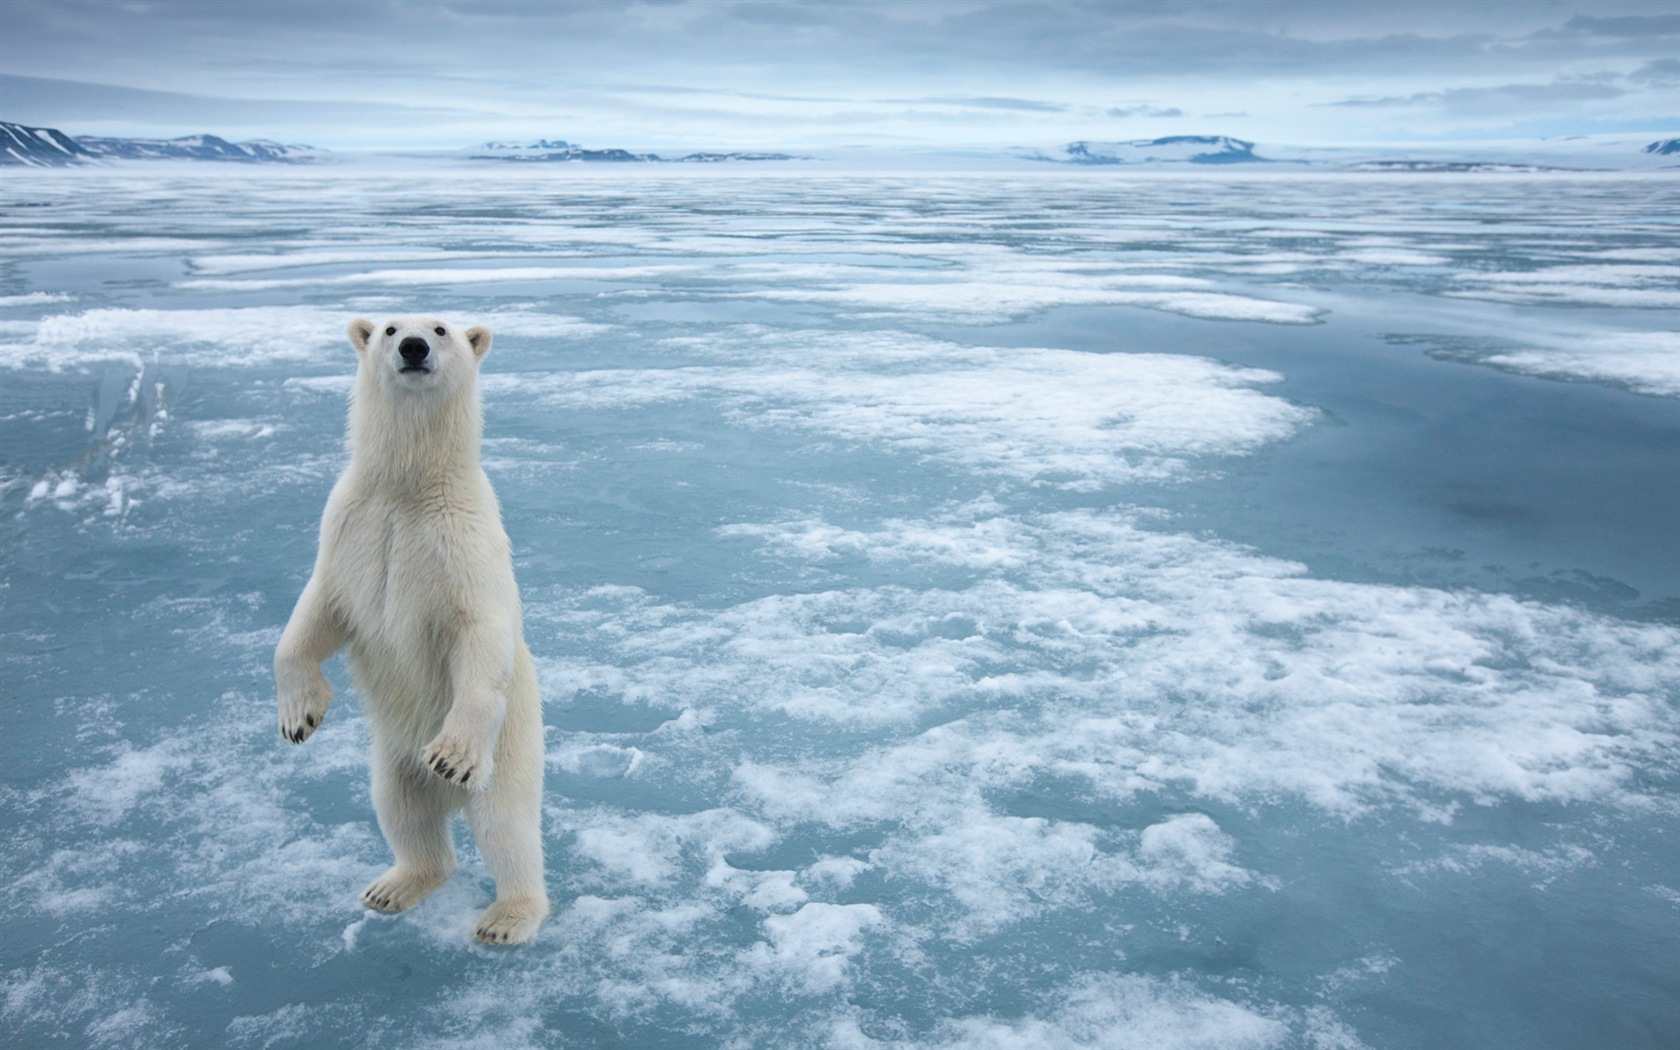 Windows 8 Wallpapers: Arctic, the nature ecological landscape, arctic animals #6 - 1680x1050